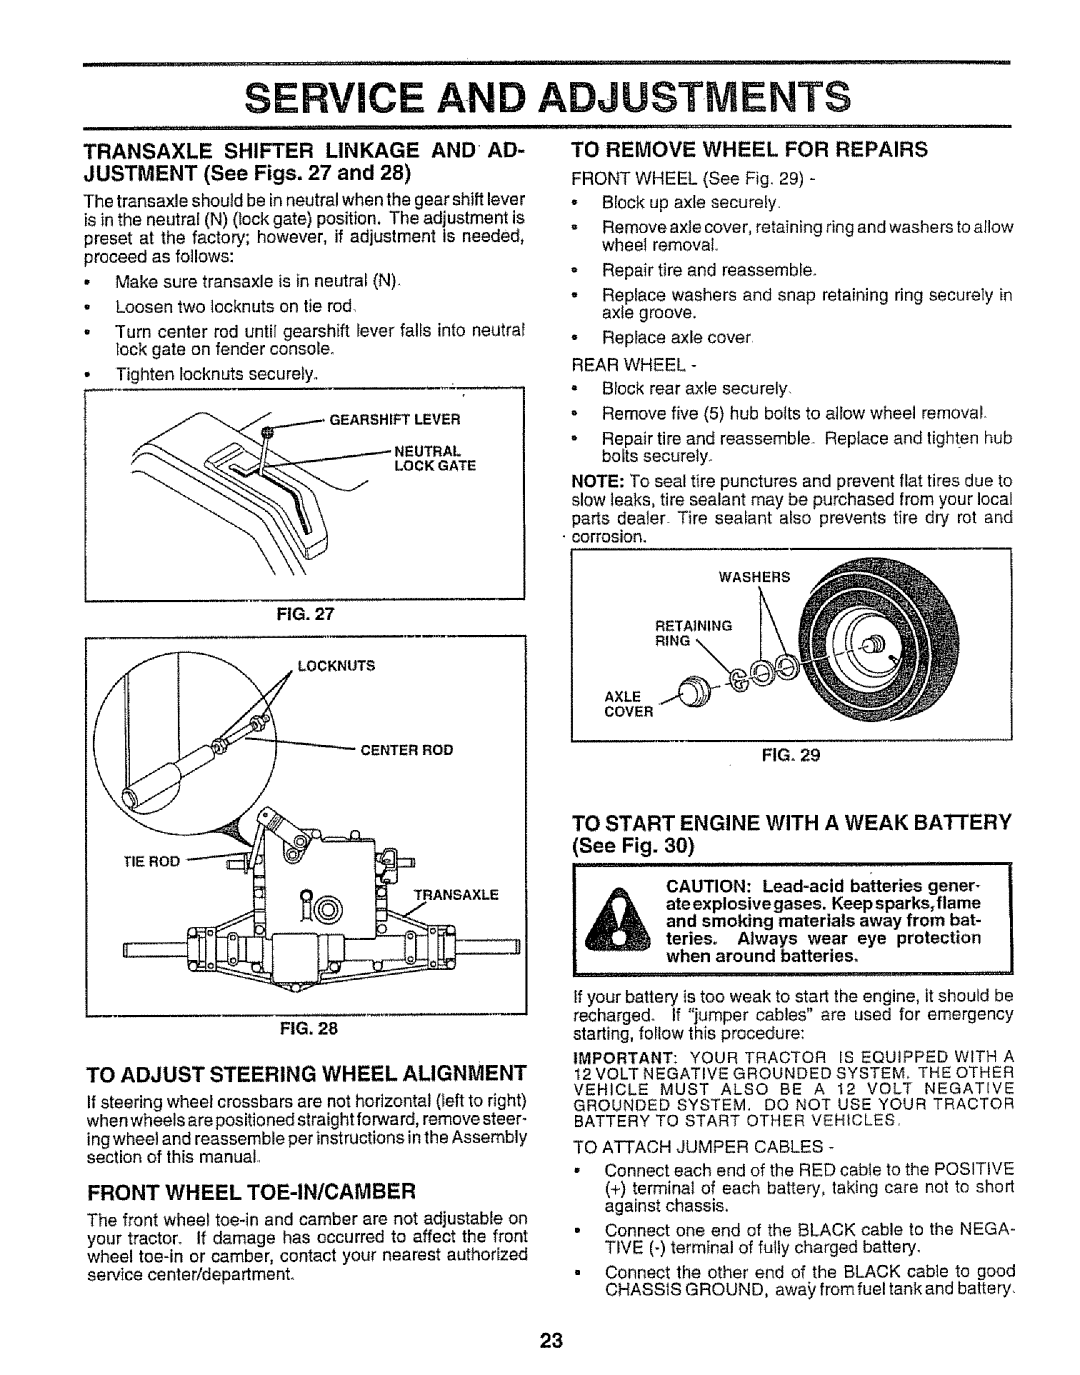 Sears 917.258542 owner manual Service, Adjustments, Front Wheel Toe-In/Camber, TO STARTENGINEWITHAWEAK BAI-rERY, See Fig 